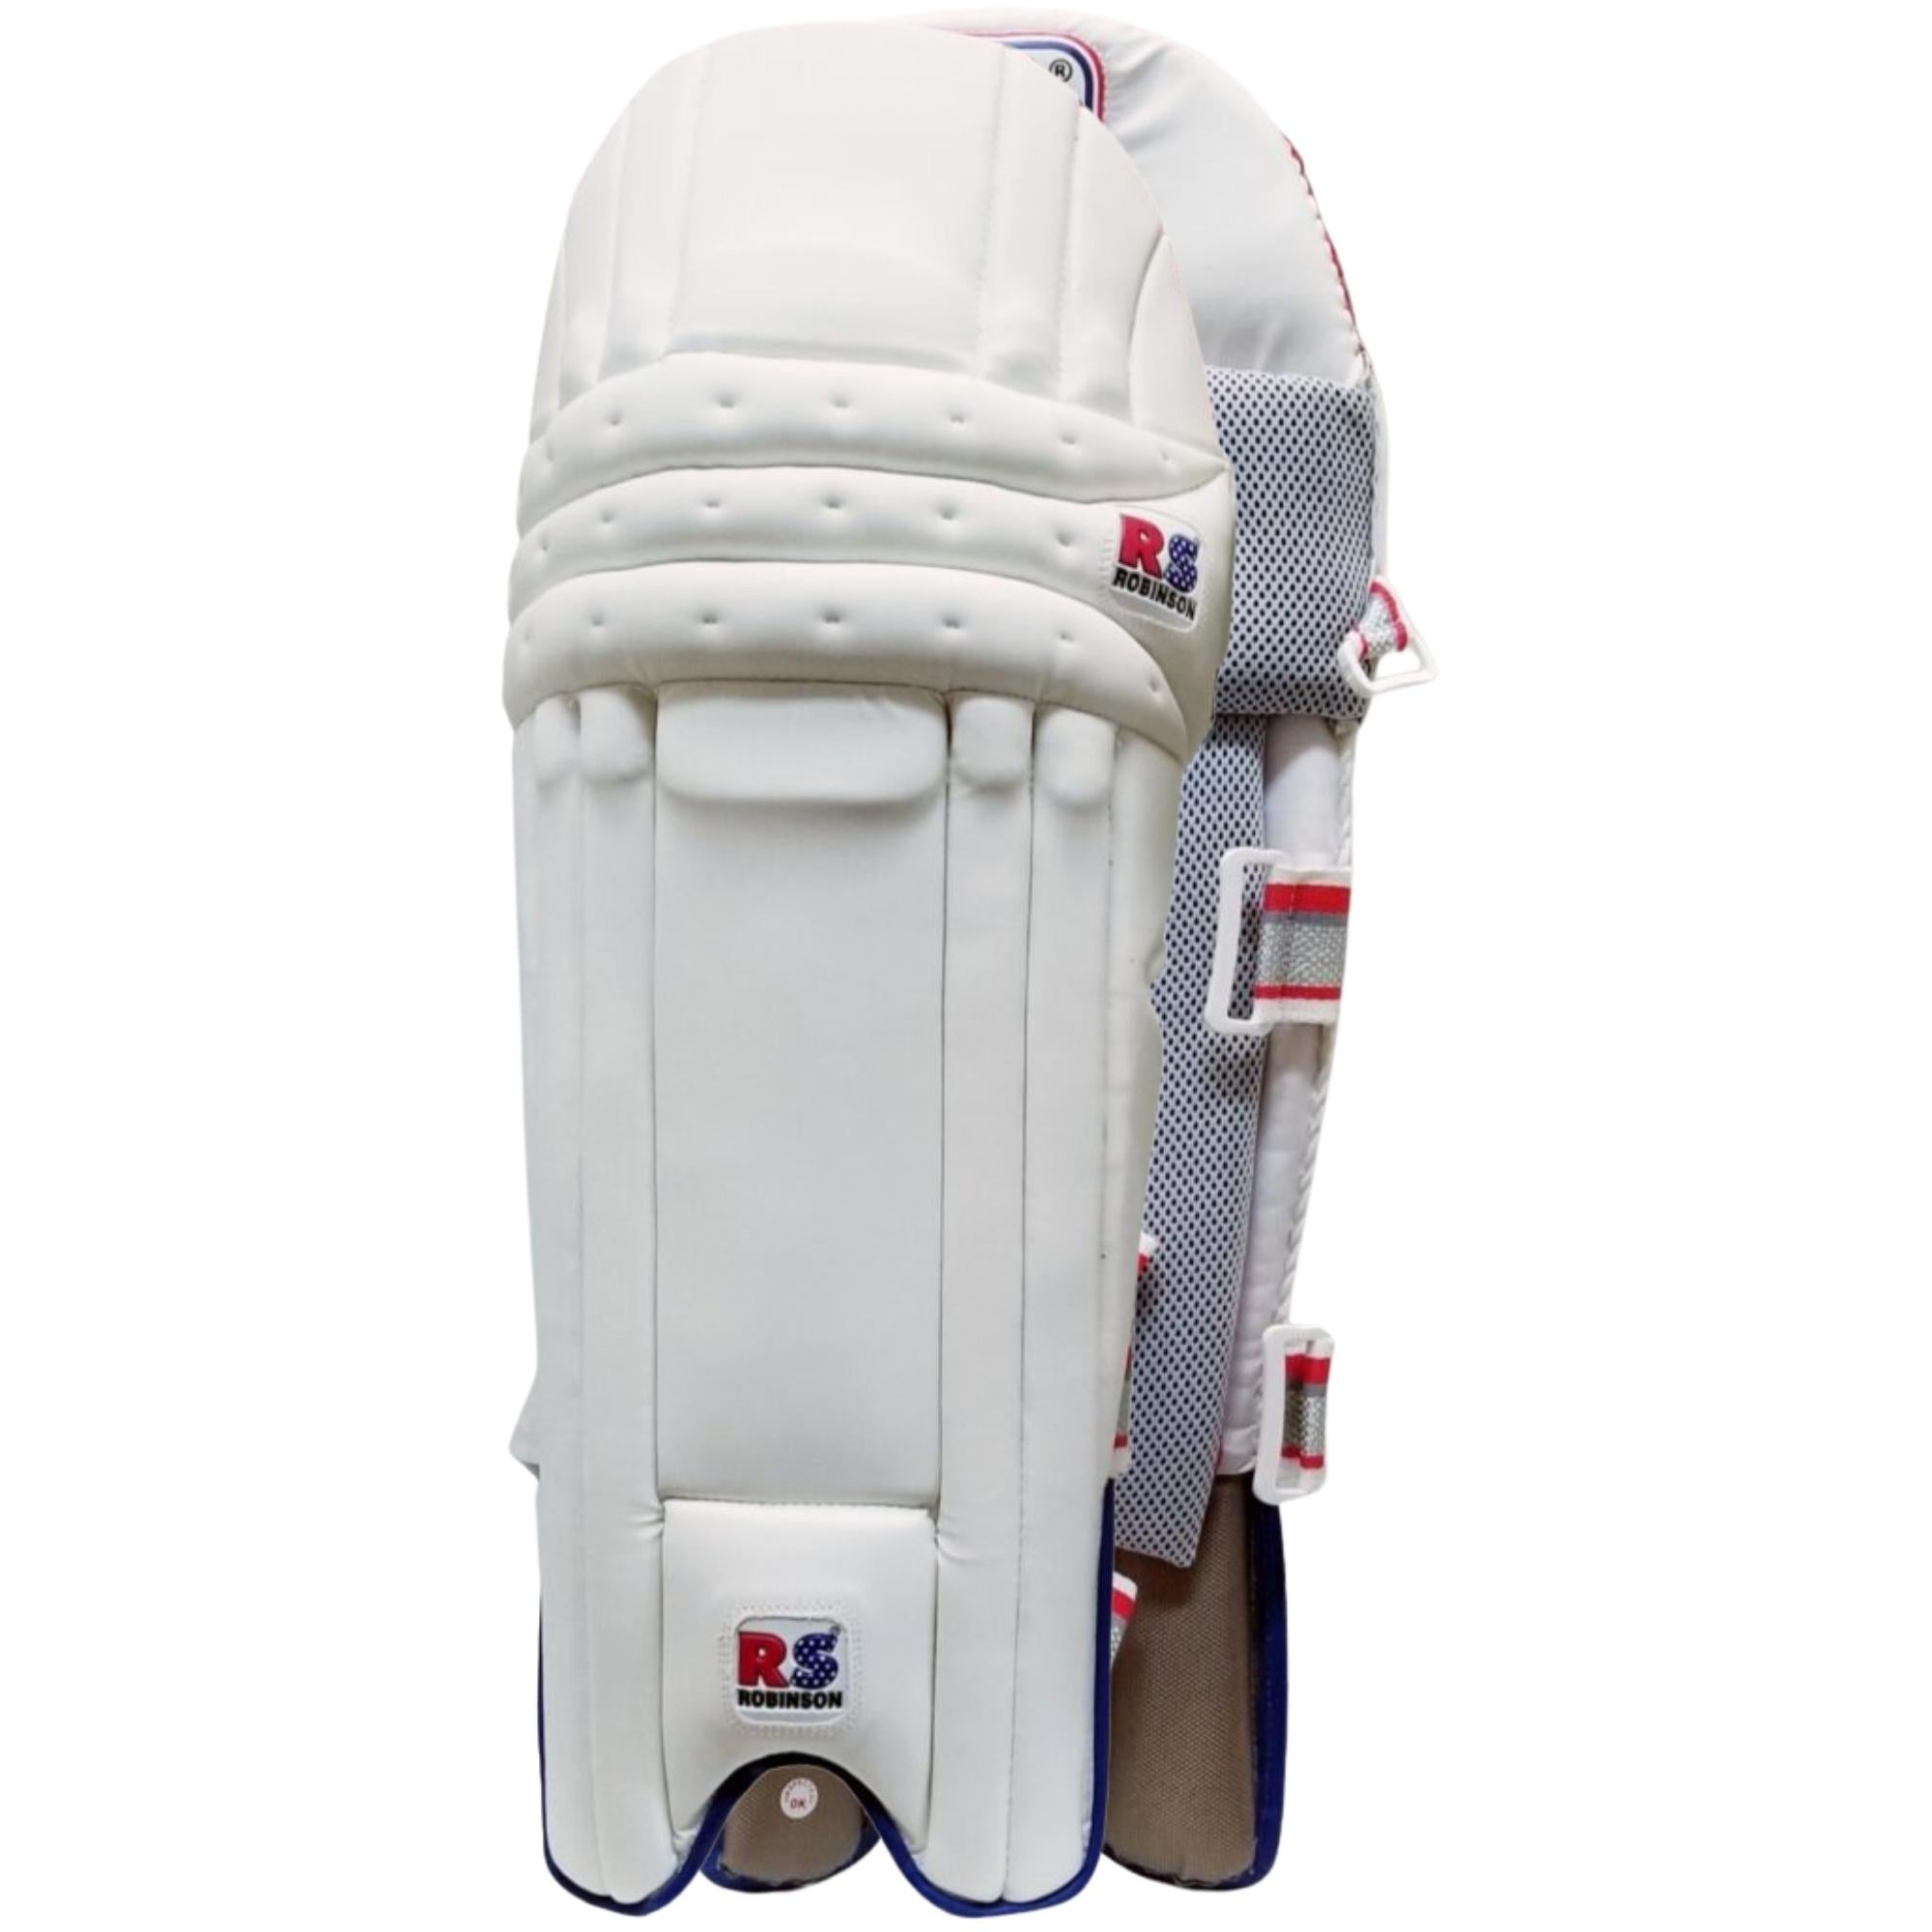 RS Robinson Red & Blue Batting Pads Right Hand